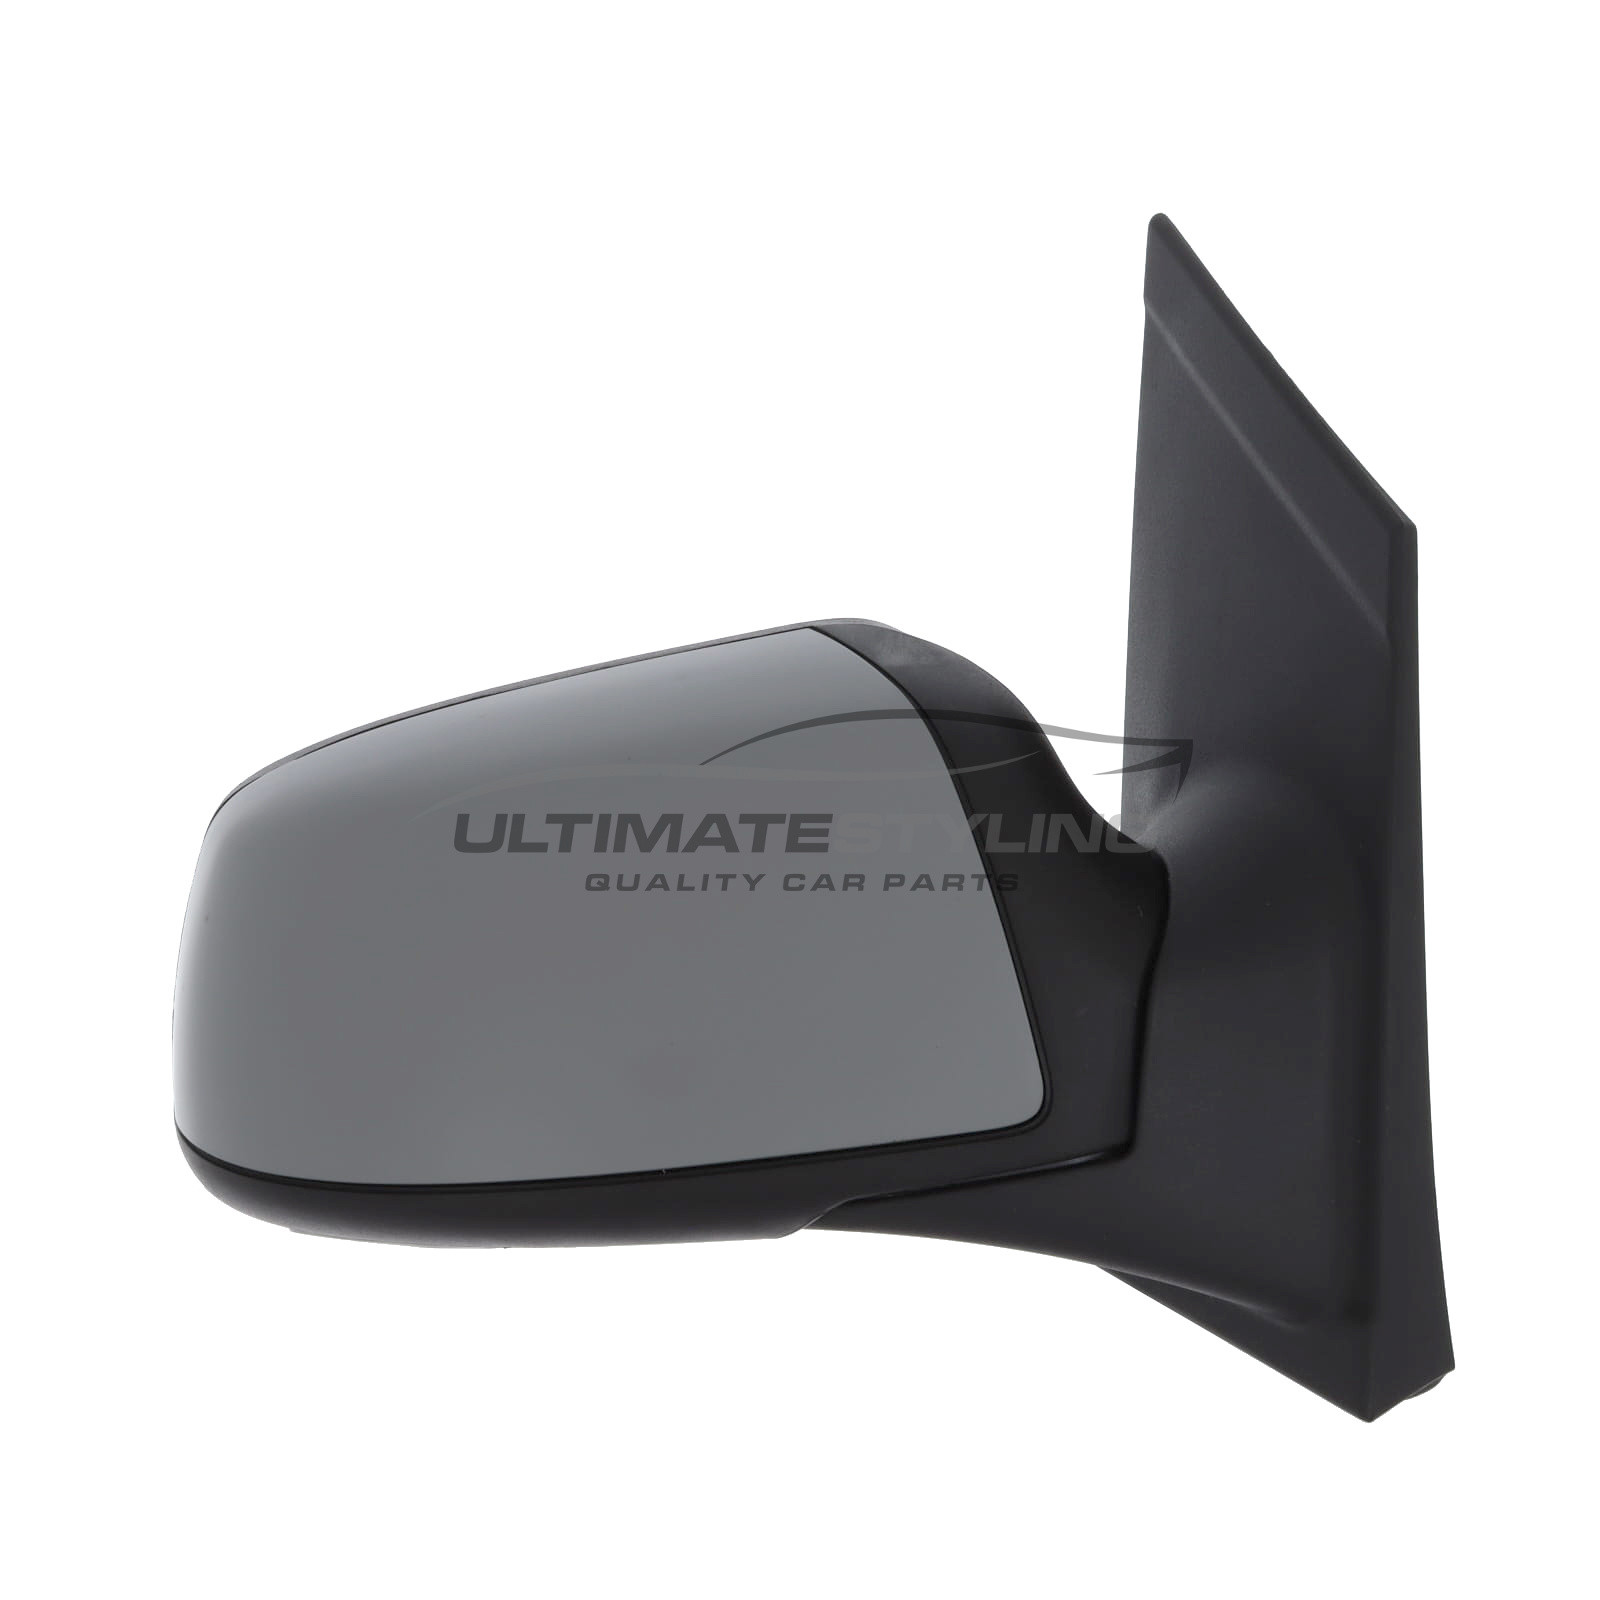 Ford Focus Wing Mirror / Door Mirror - Drivers Side (RH) - Electric adjustment - Heated Glass - Power Folding - Puddle Light - Primed